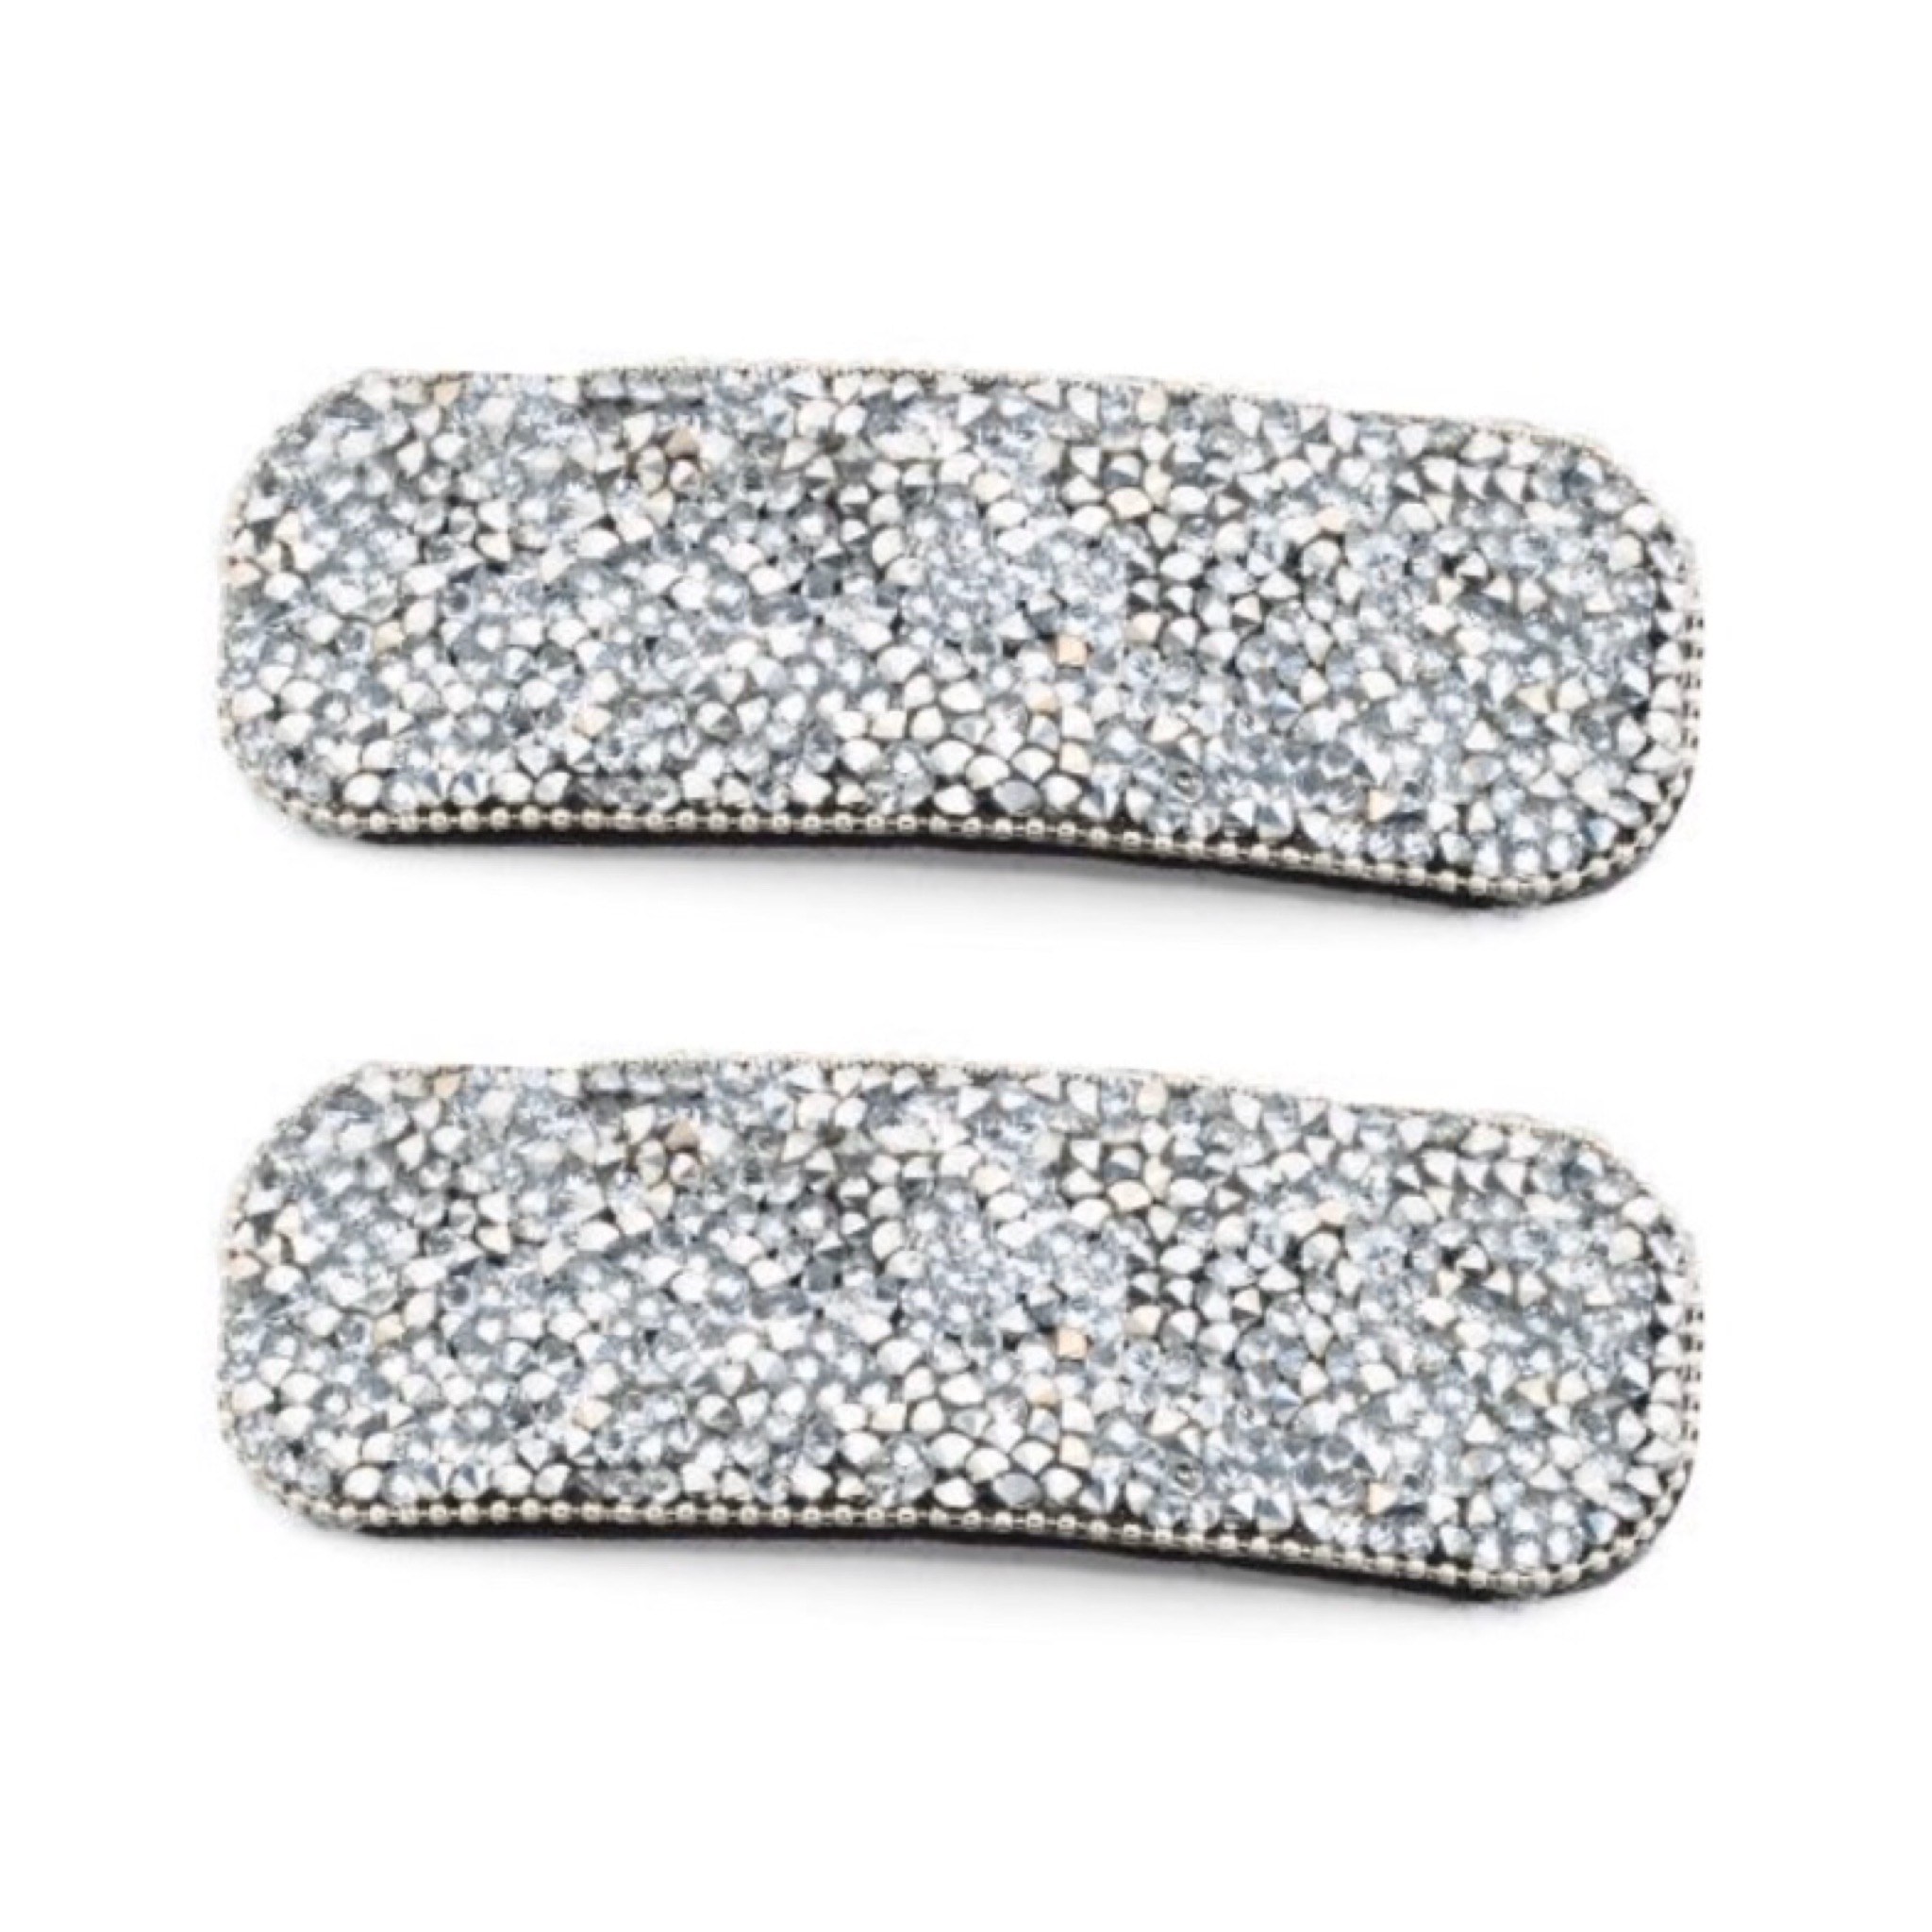 Silver Embellished Hair Clips - Hair Accessories - Wisteria London